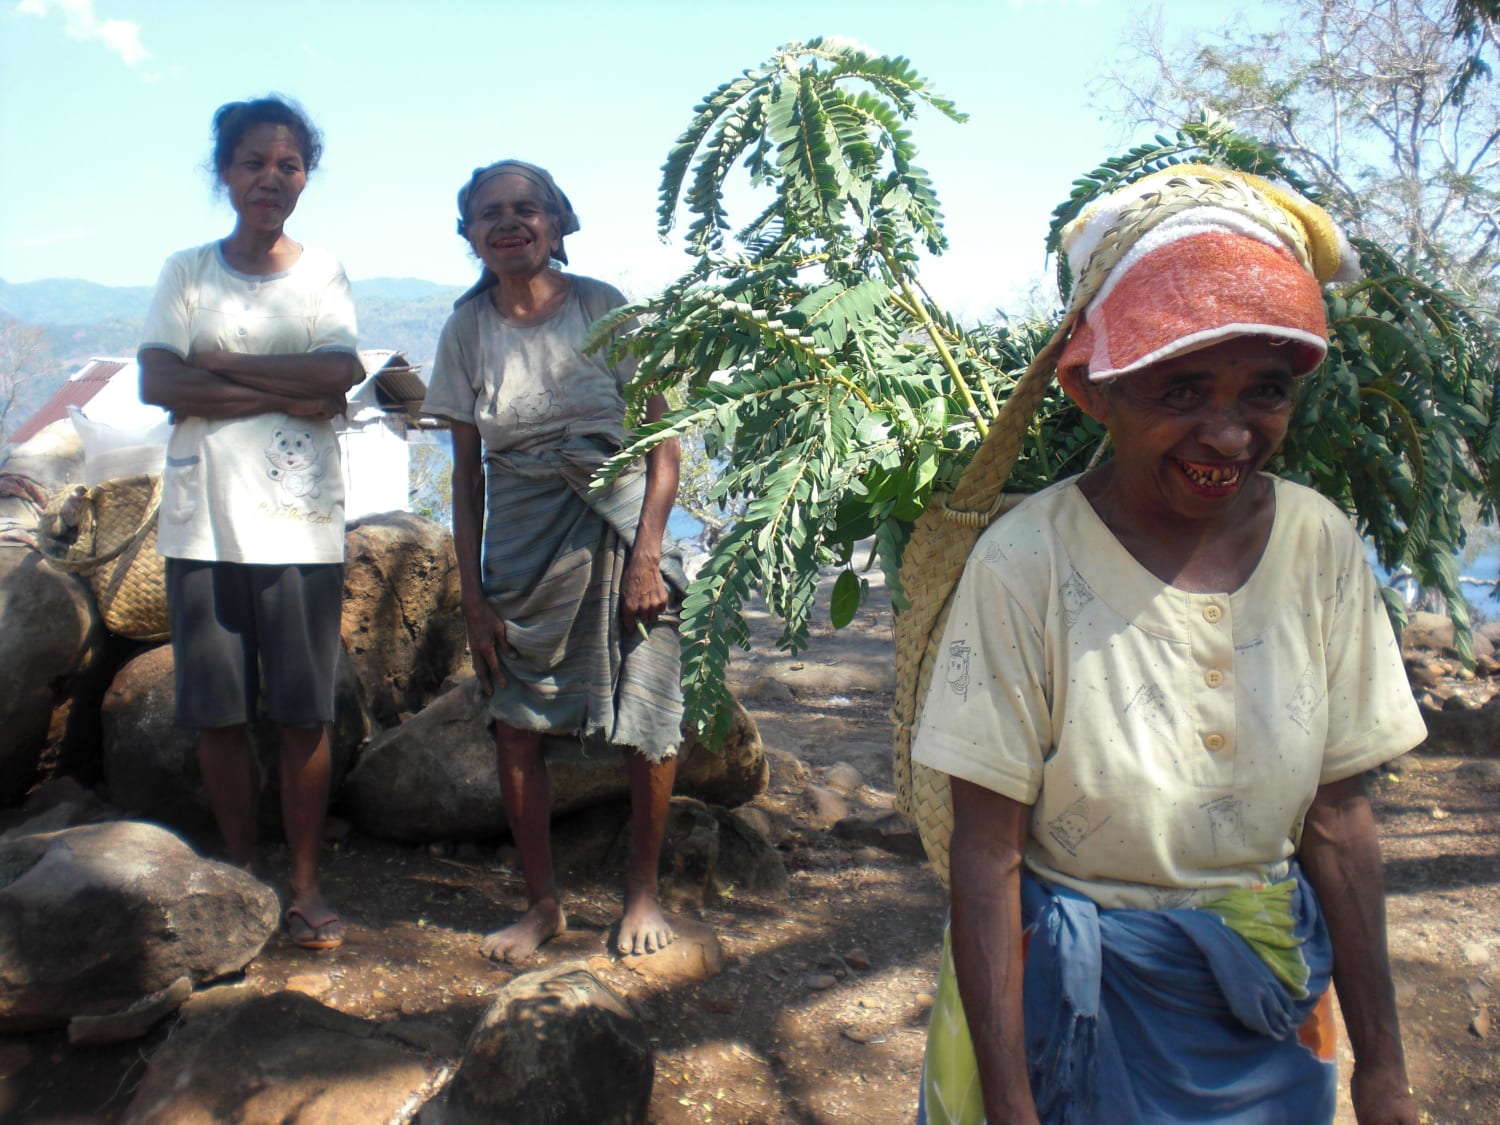 Three women of the Reta tribe, a small group of Papuan people in Nusa Tenggara Timur, Eastern Indonesia. They are gathering edible plants during the hunger season.